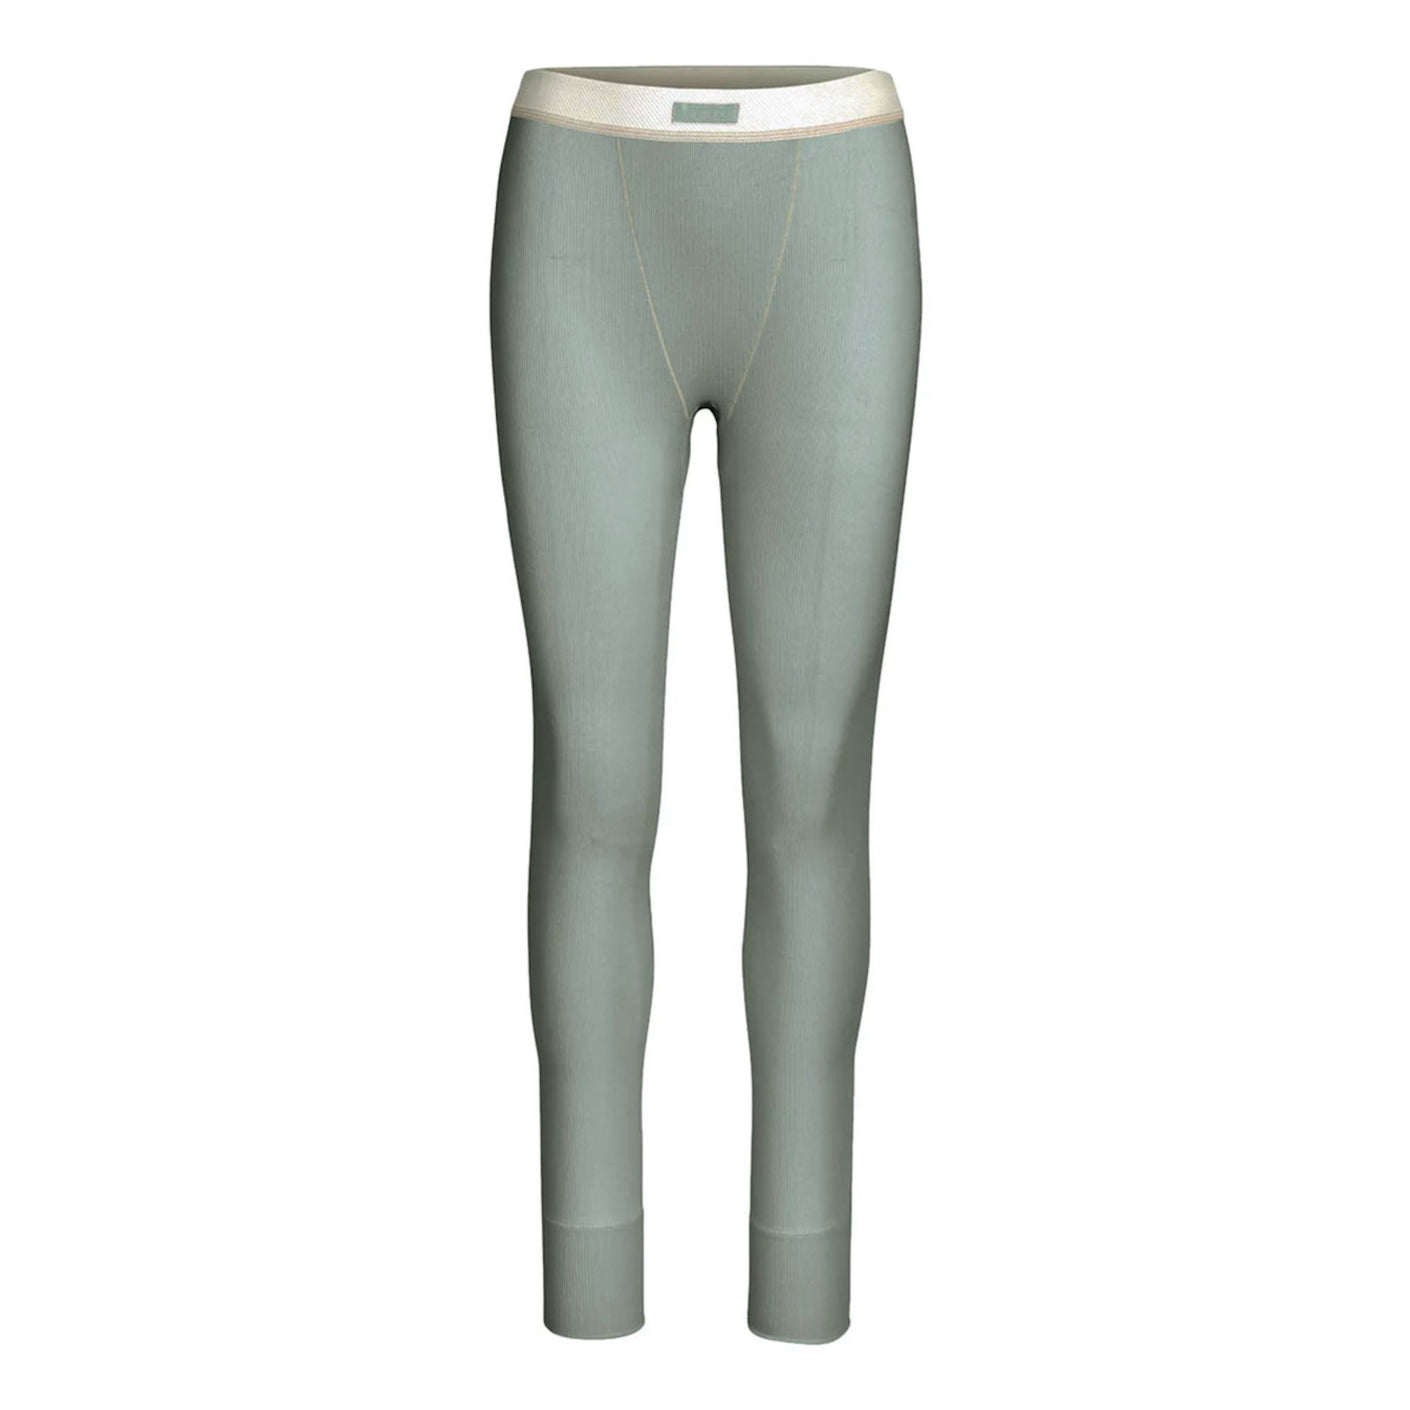 Curvy Girl Slit Top Band and Leggings - Grey – The Society Marketplace